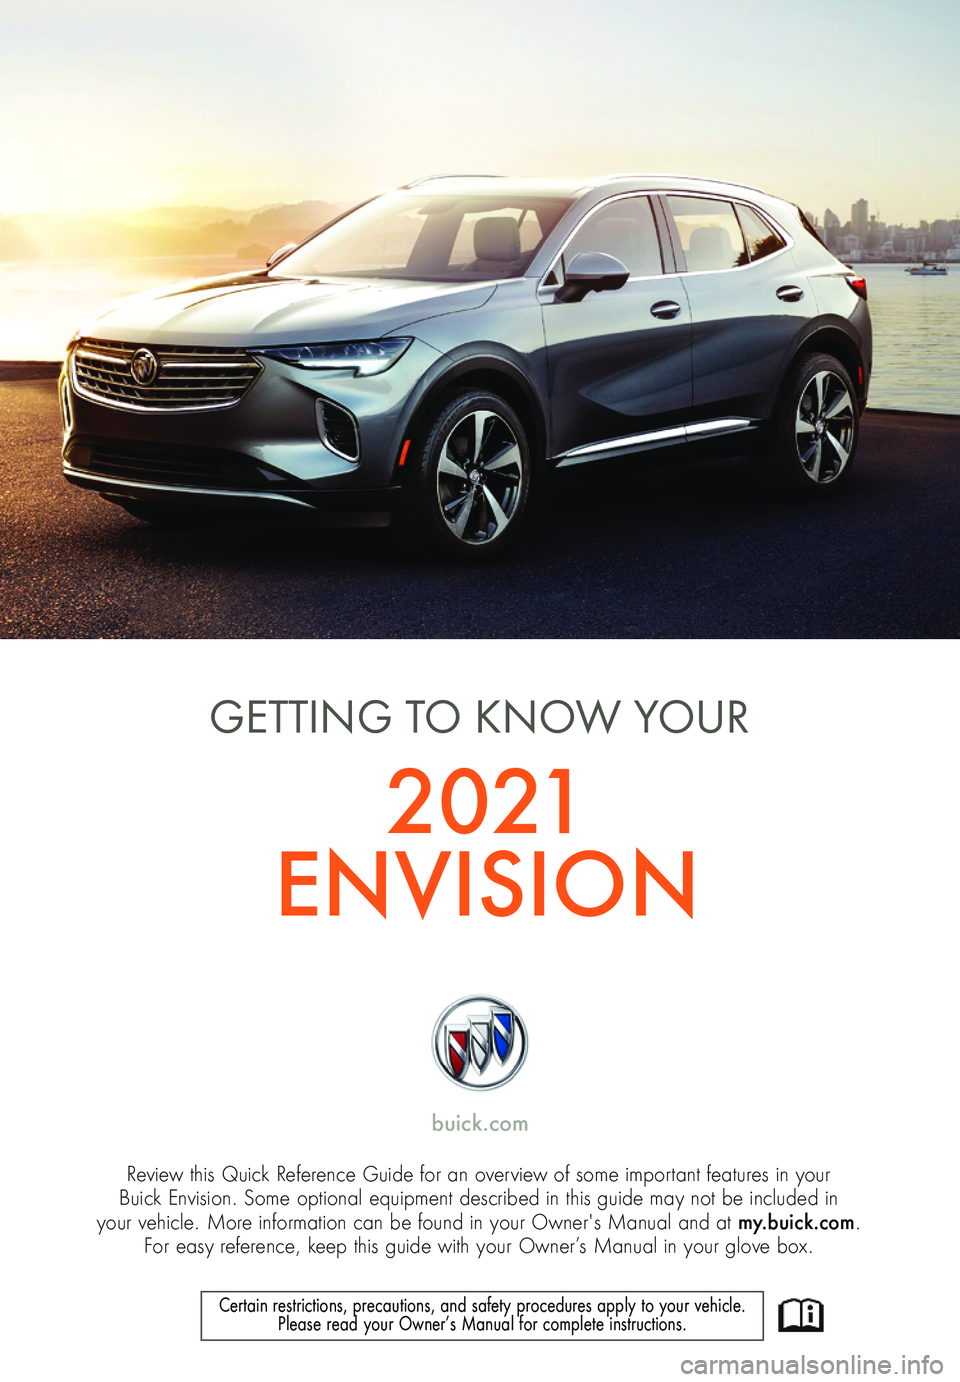 BUICK ENVISION 2021  Get To Know Guide 1
Review this Quick Reference Guide for an overview of some important features in your  Buick Envision. Some optional equipment described in this guide may not be included in  your vehicle. More infor